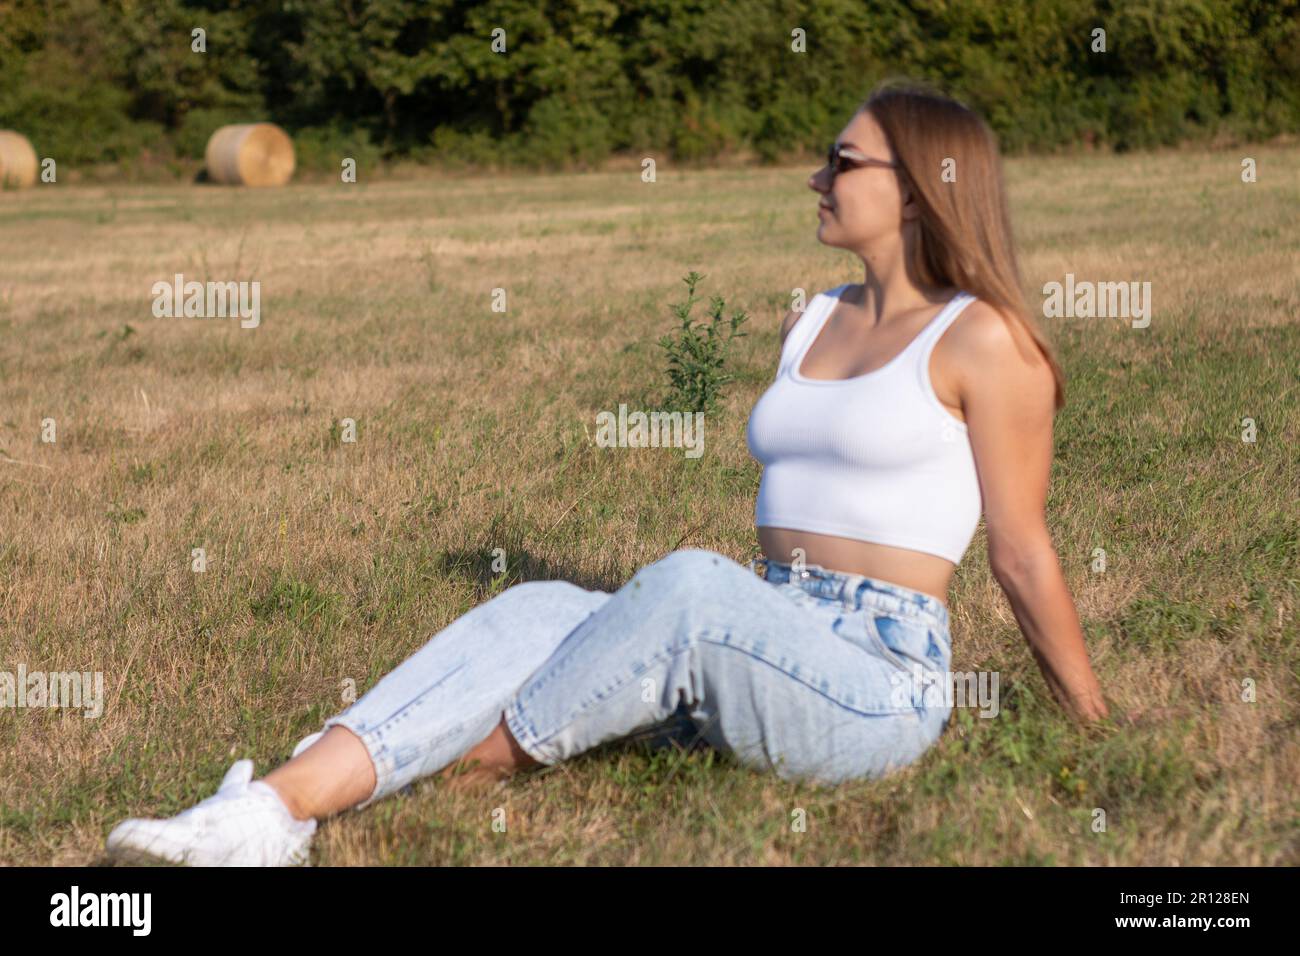 A young woman with blonde hair enjoying a sunny day outdoors, seated on a grassy field in a white tank top and blue jeans Stock Photo